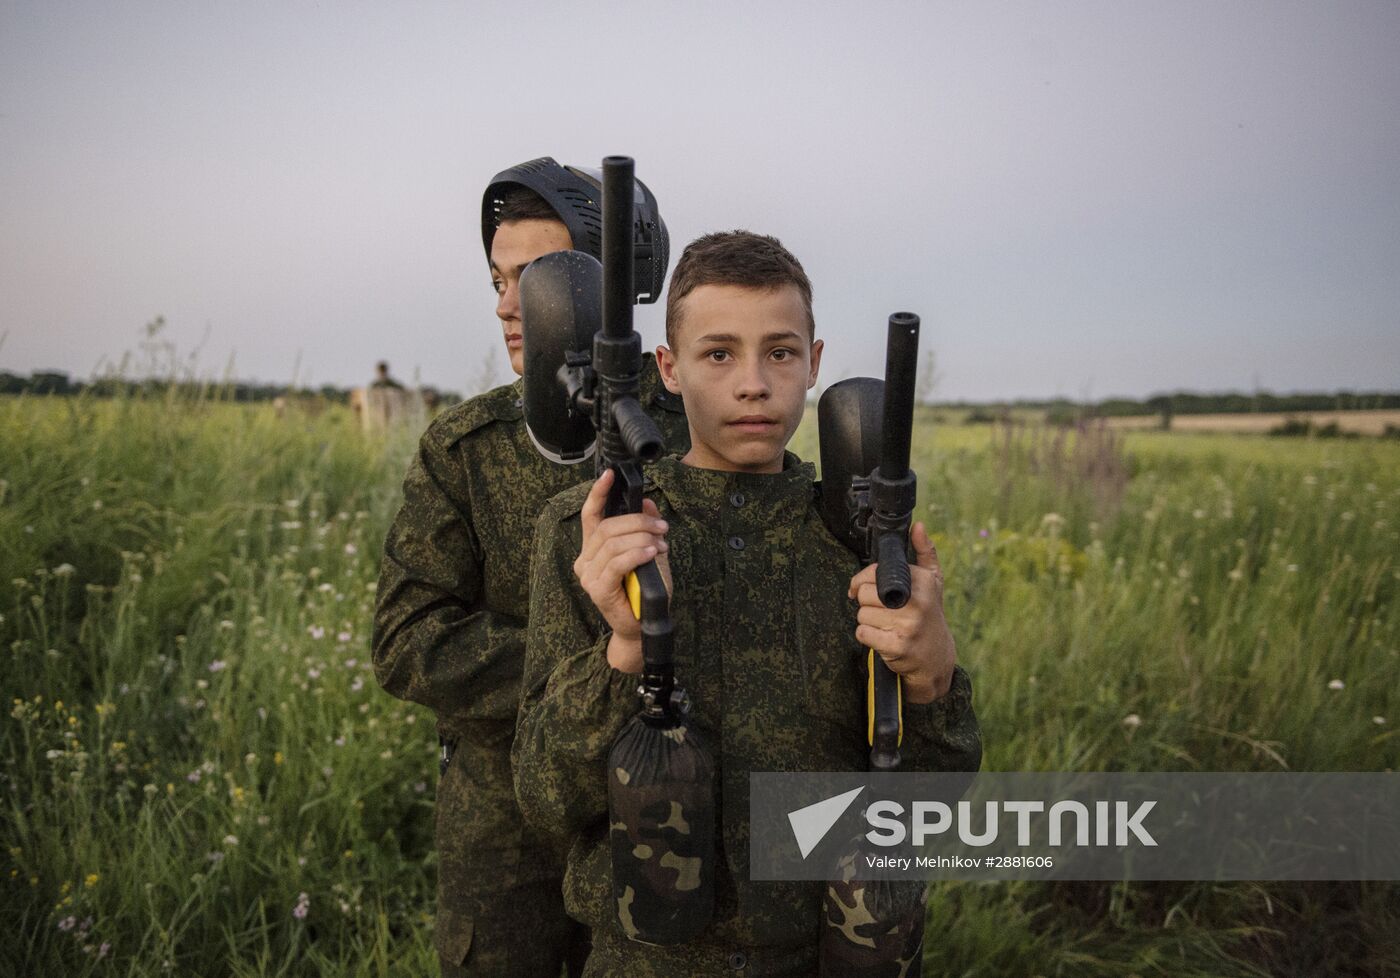 DPR youth attend 'combat survival' training